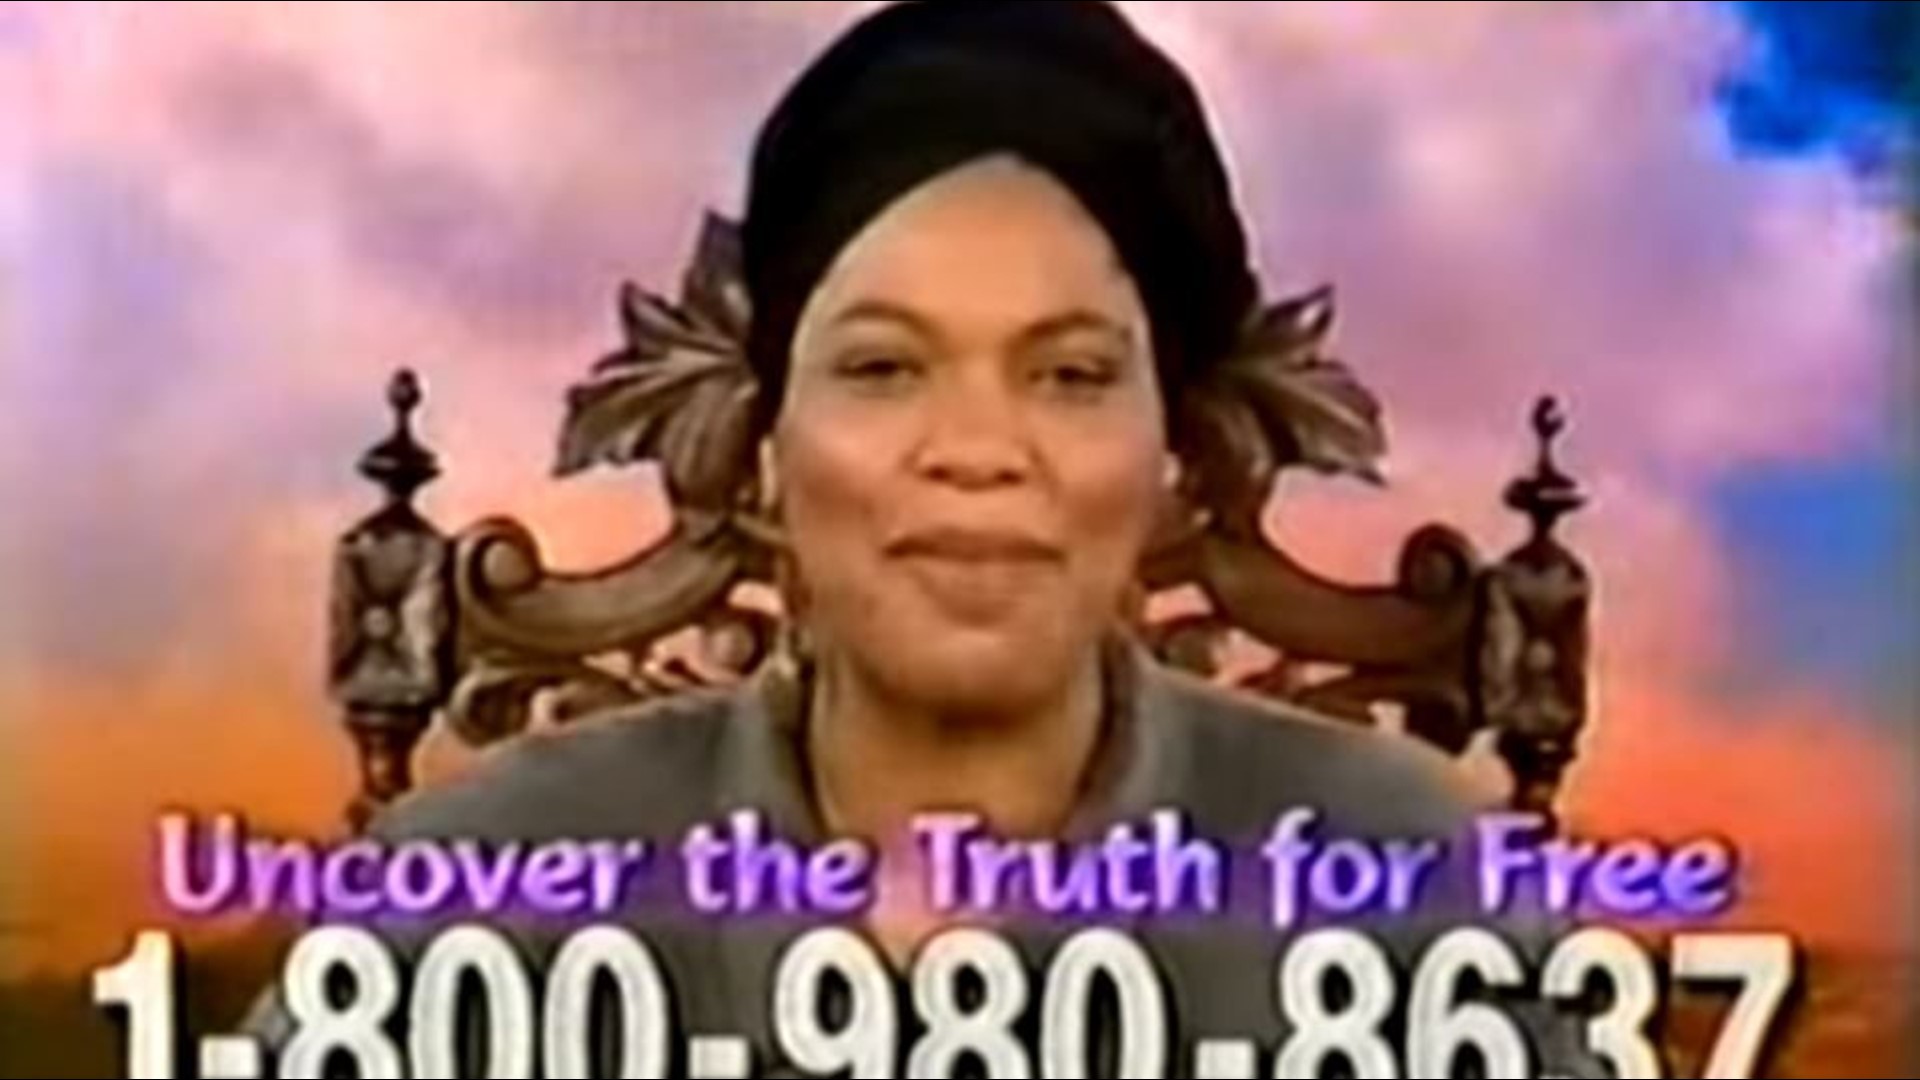 Actress Who Played Tv Psychic Miss Cleo Dies Of Cancer At 53